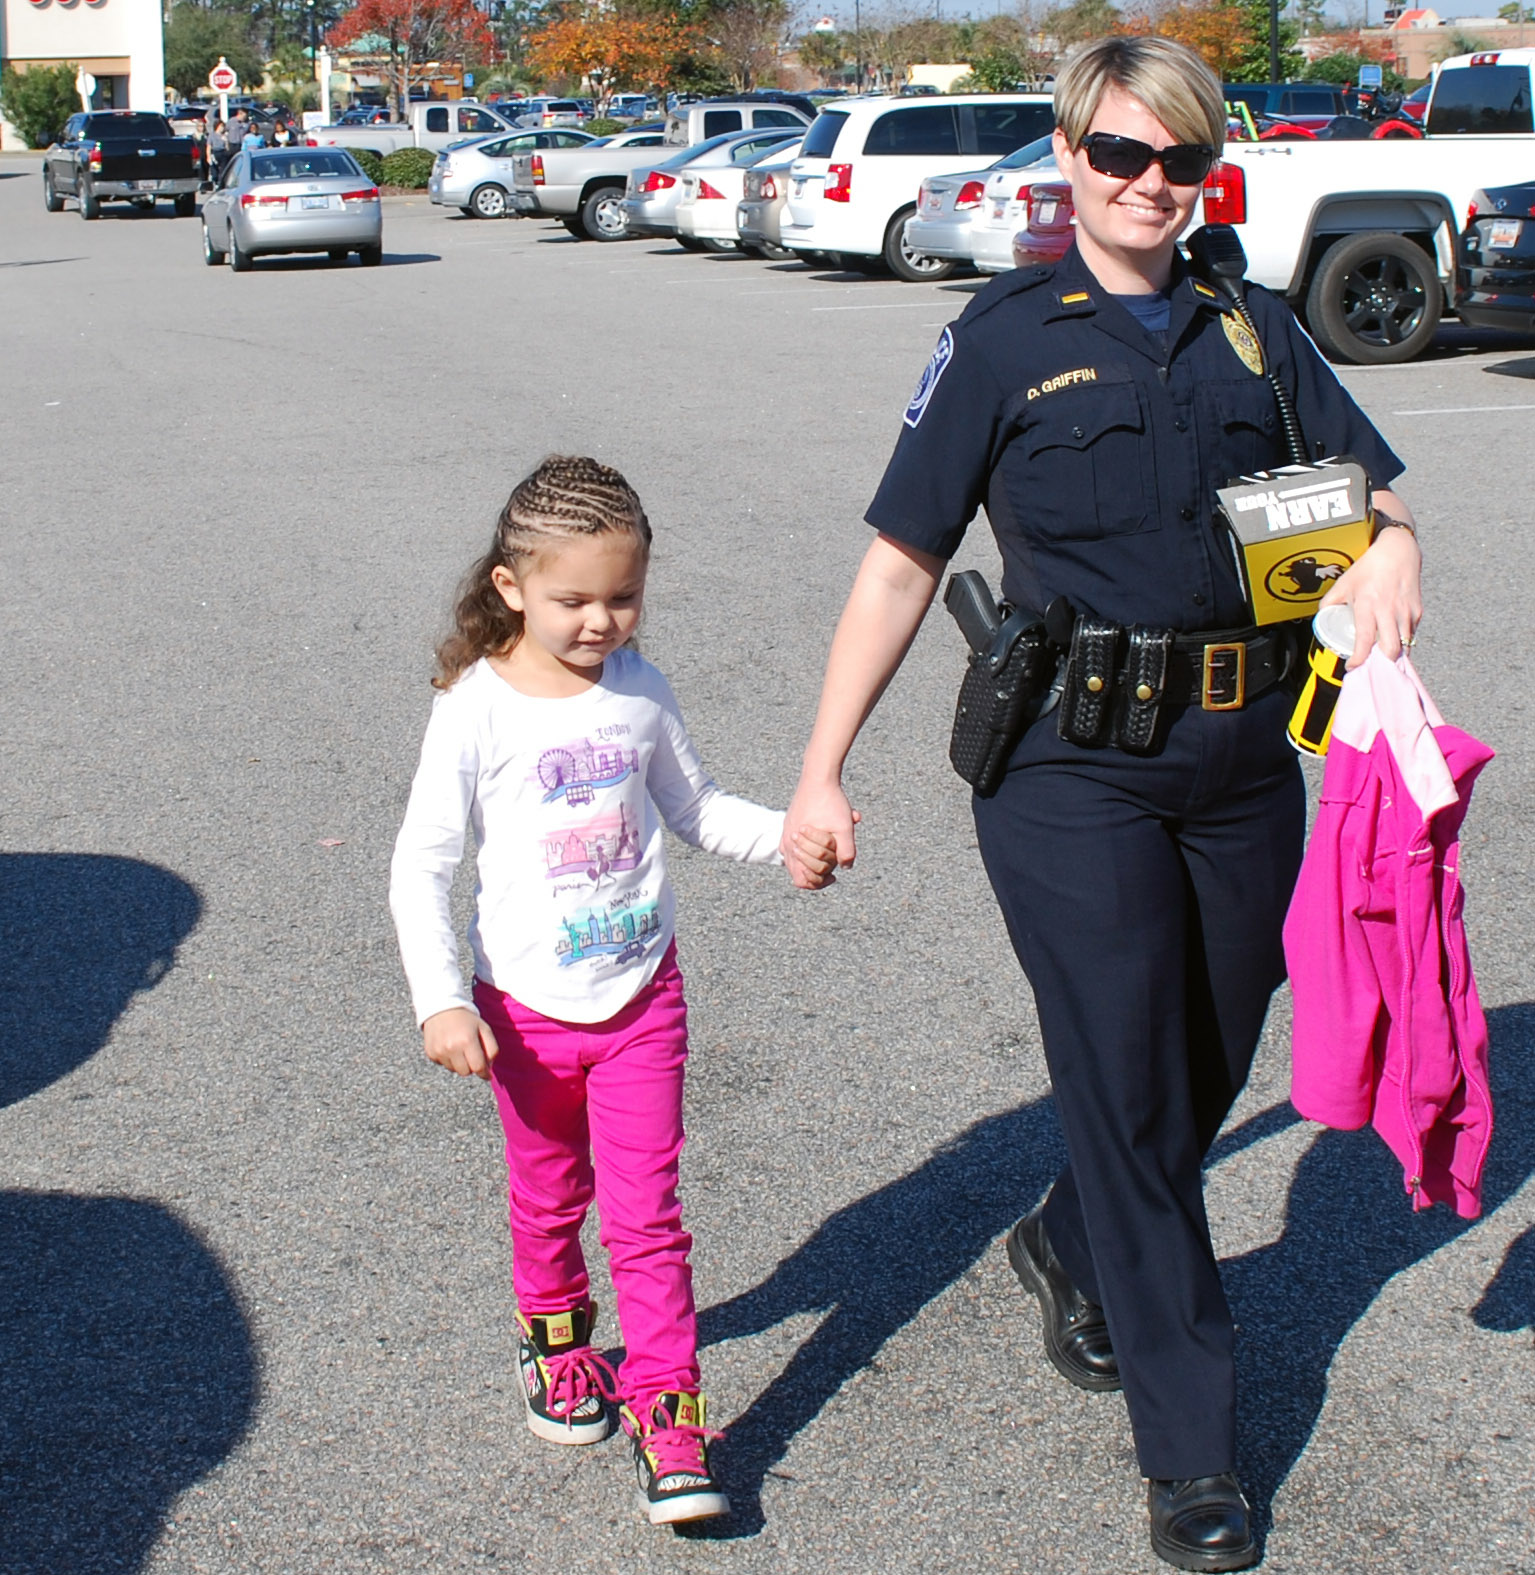 Shop with a Cop, City of North Myrtle Beach